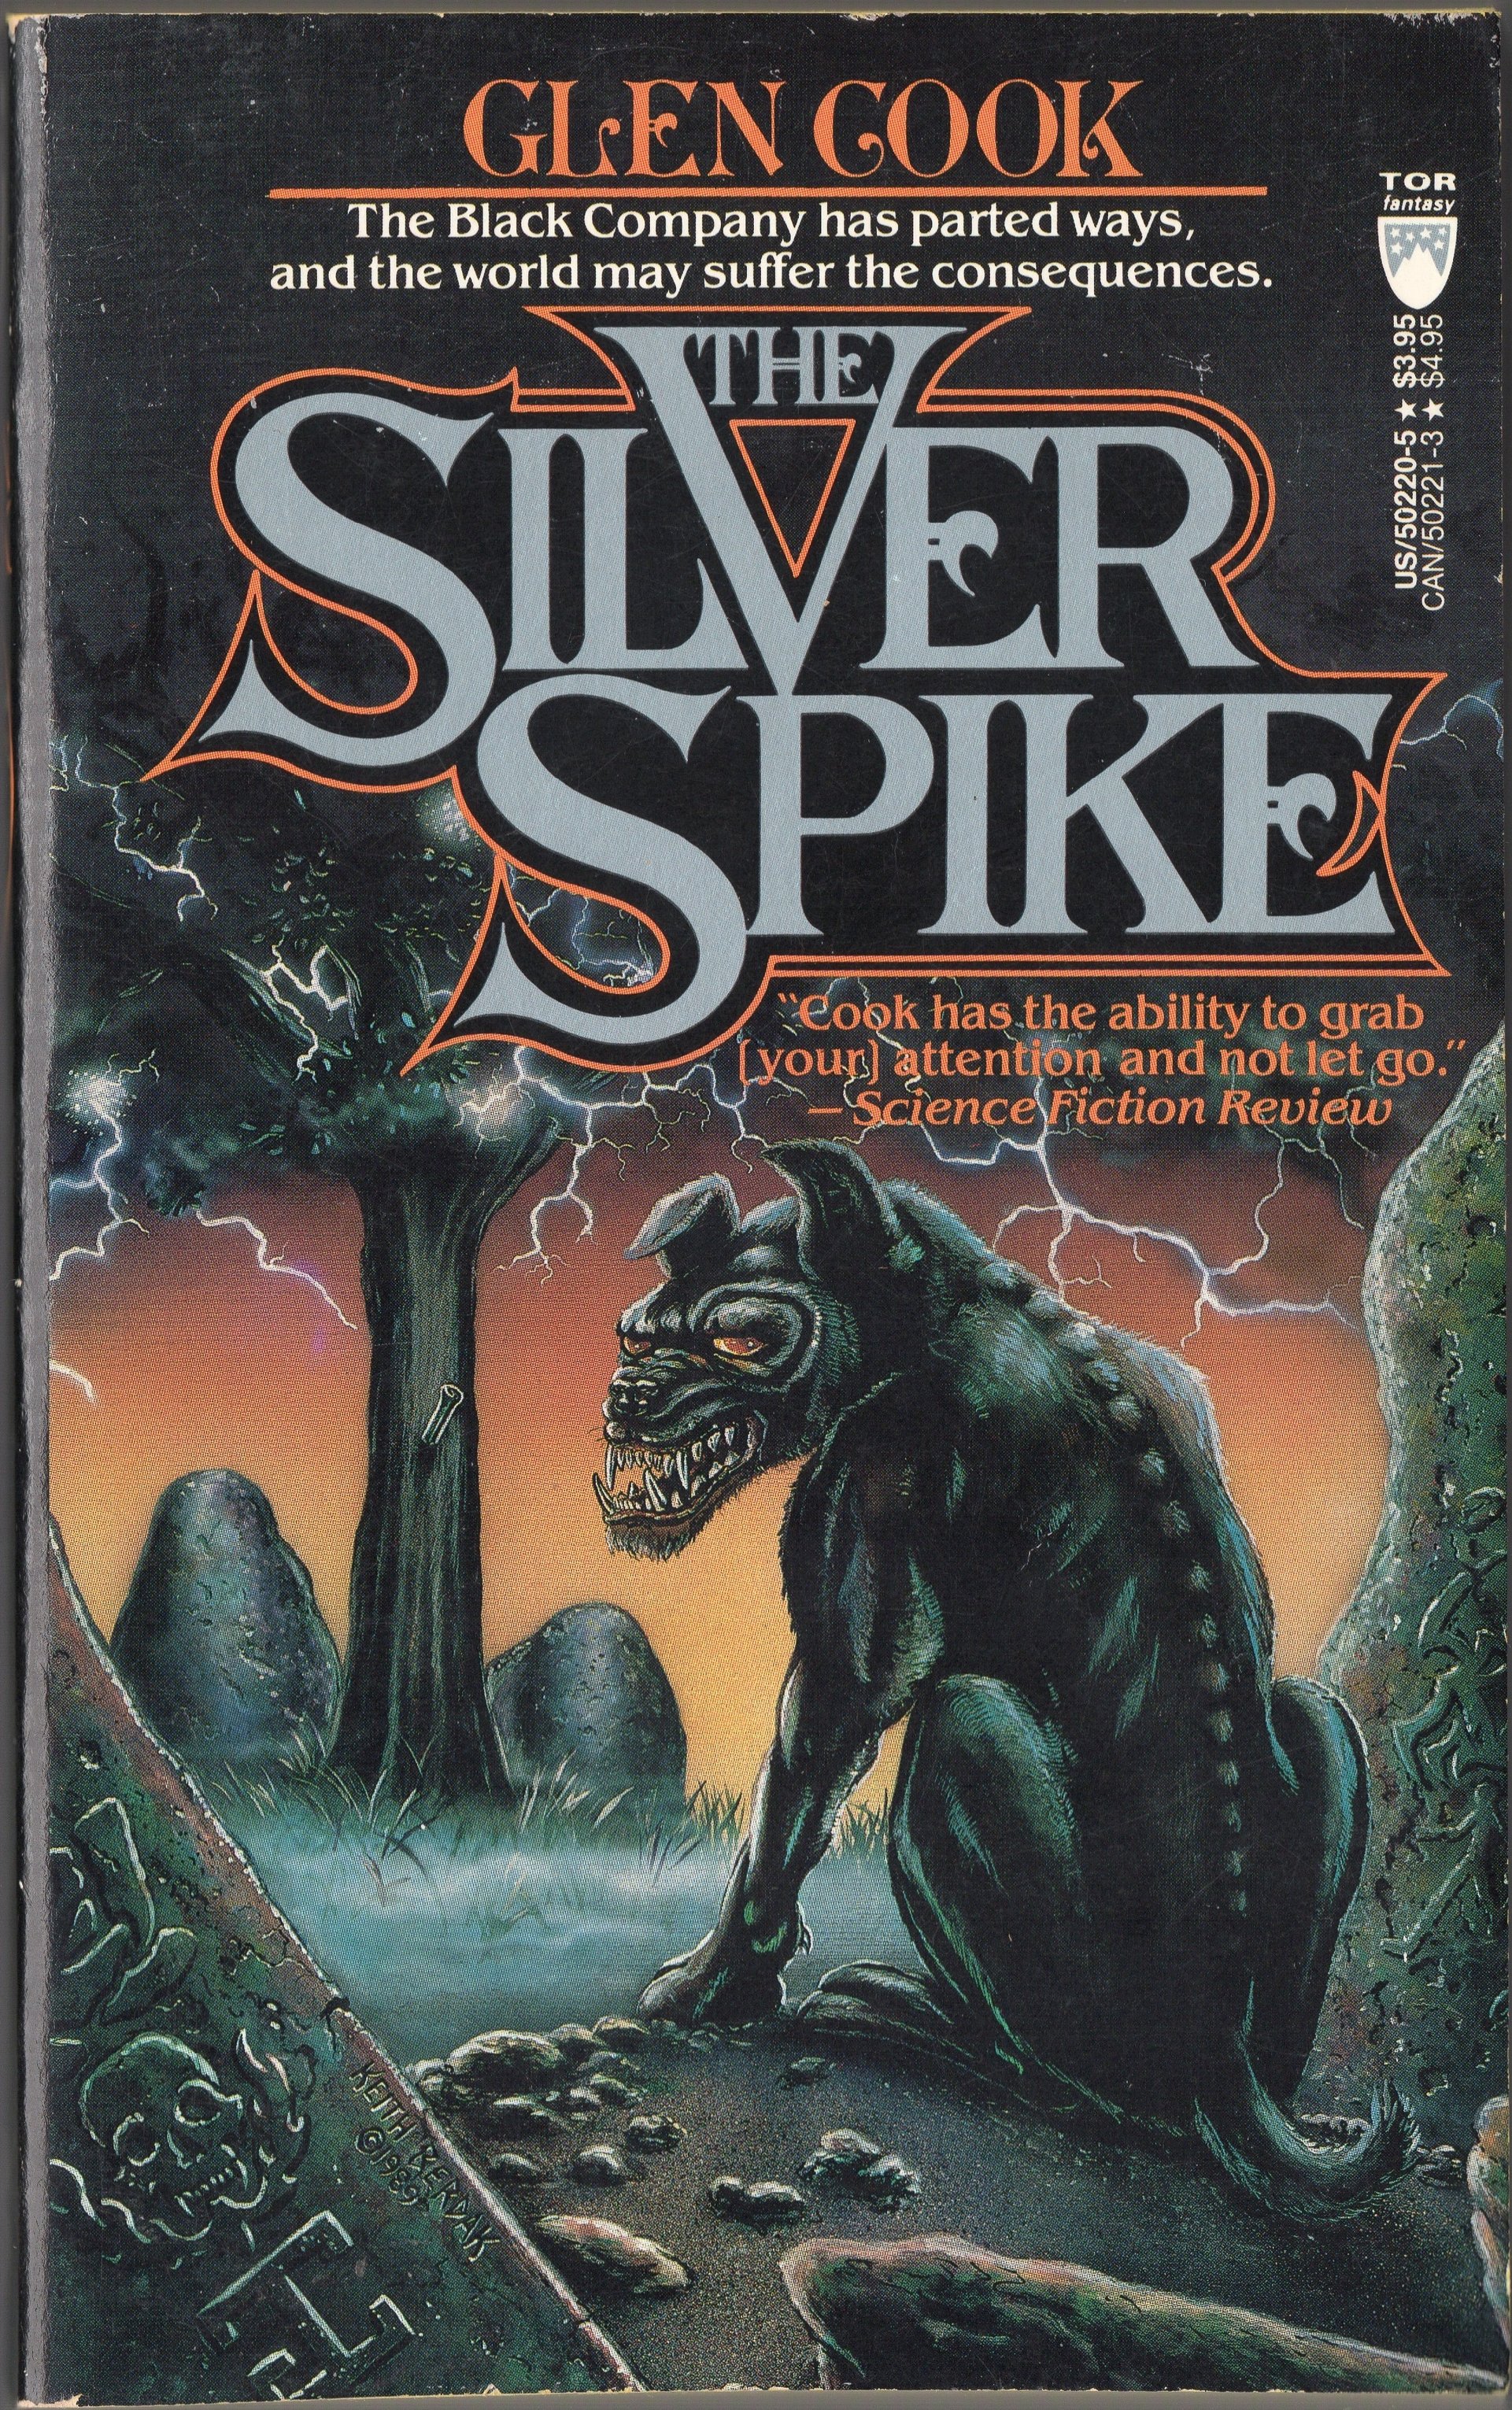 Glen Cook: The silver spike (1989, Tom Doherty)